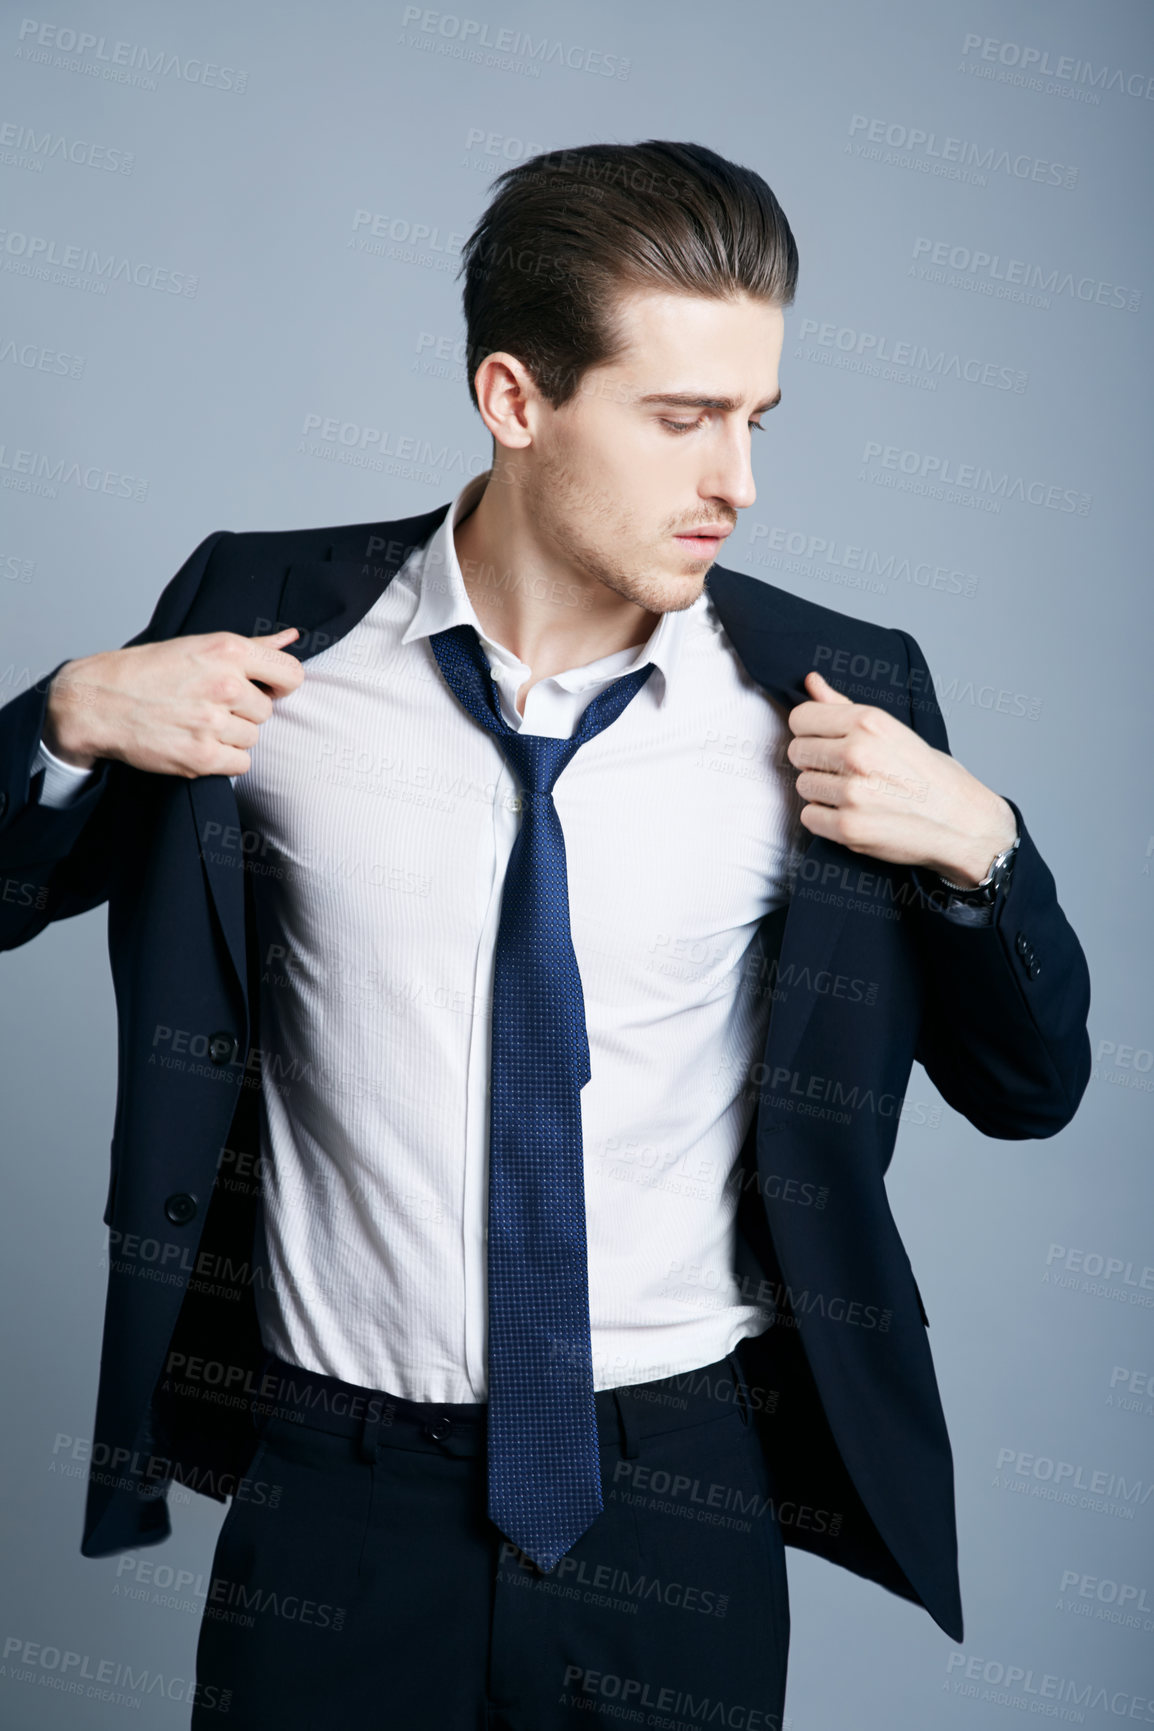 Buy stock photo Elegant, fashion and a man in a suit for business isolated on a dark background in a studio. Thinking, corporate and a businessman with style for executive, professional and career as a boss